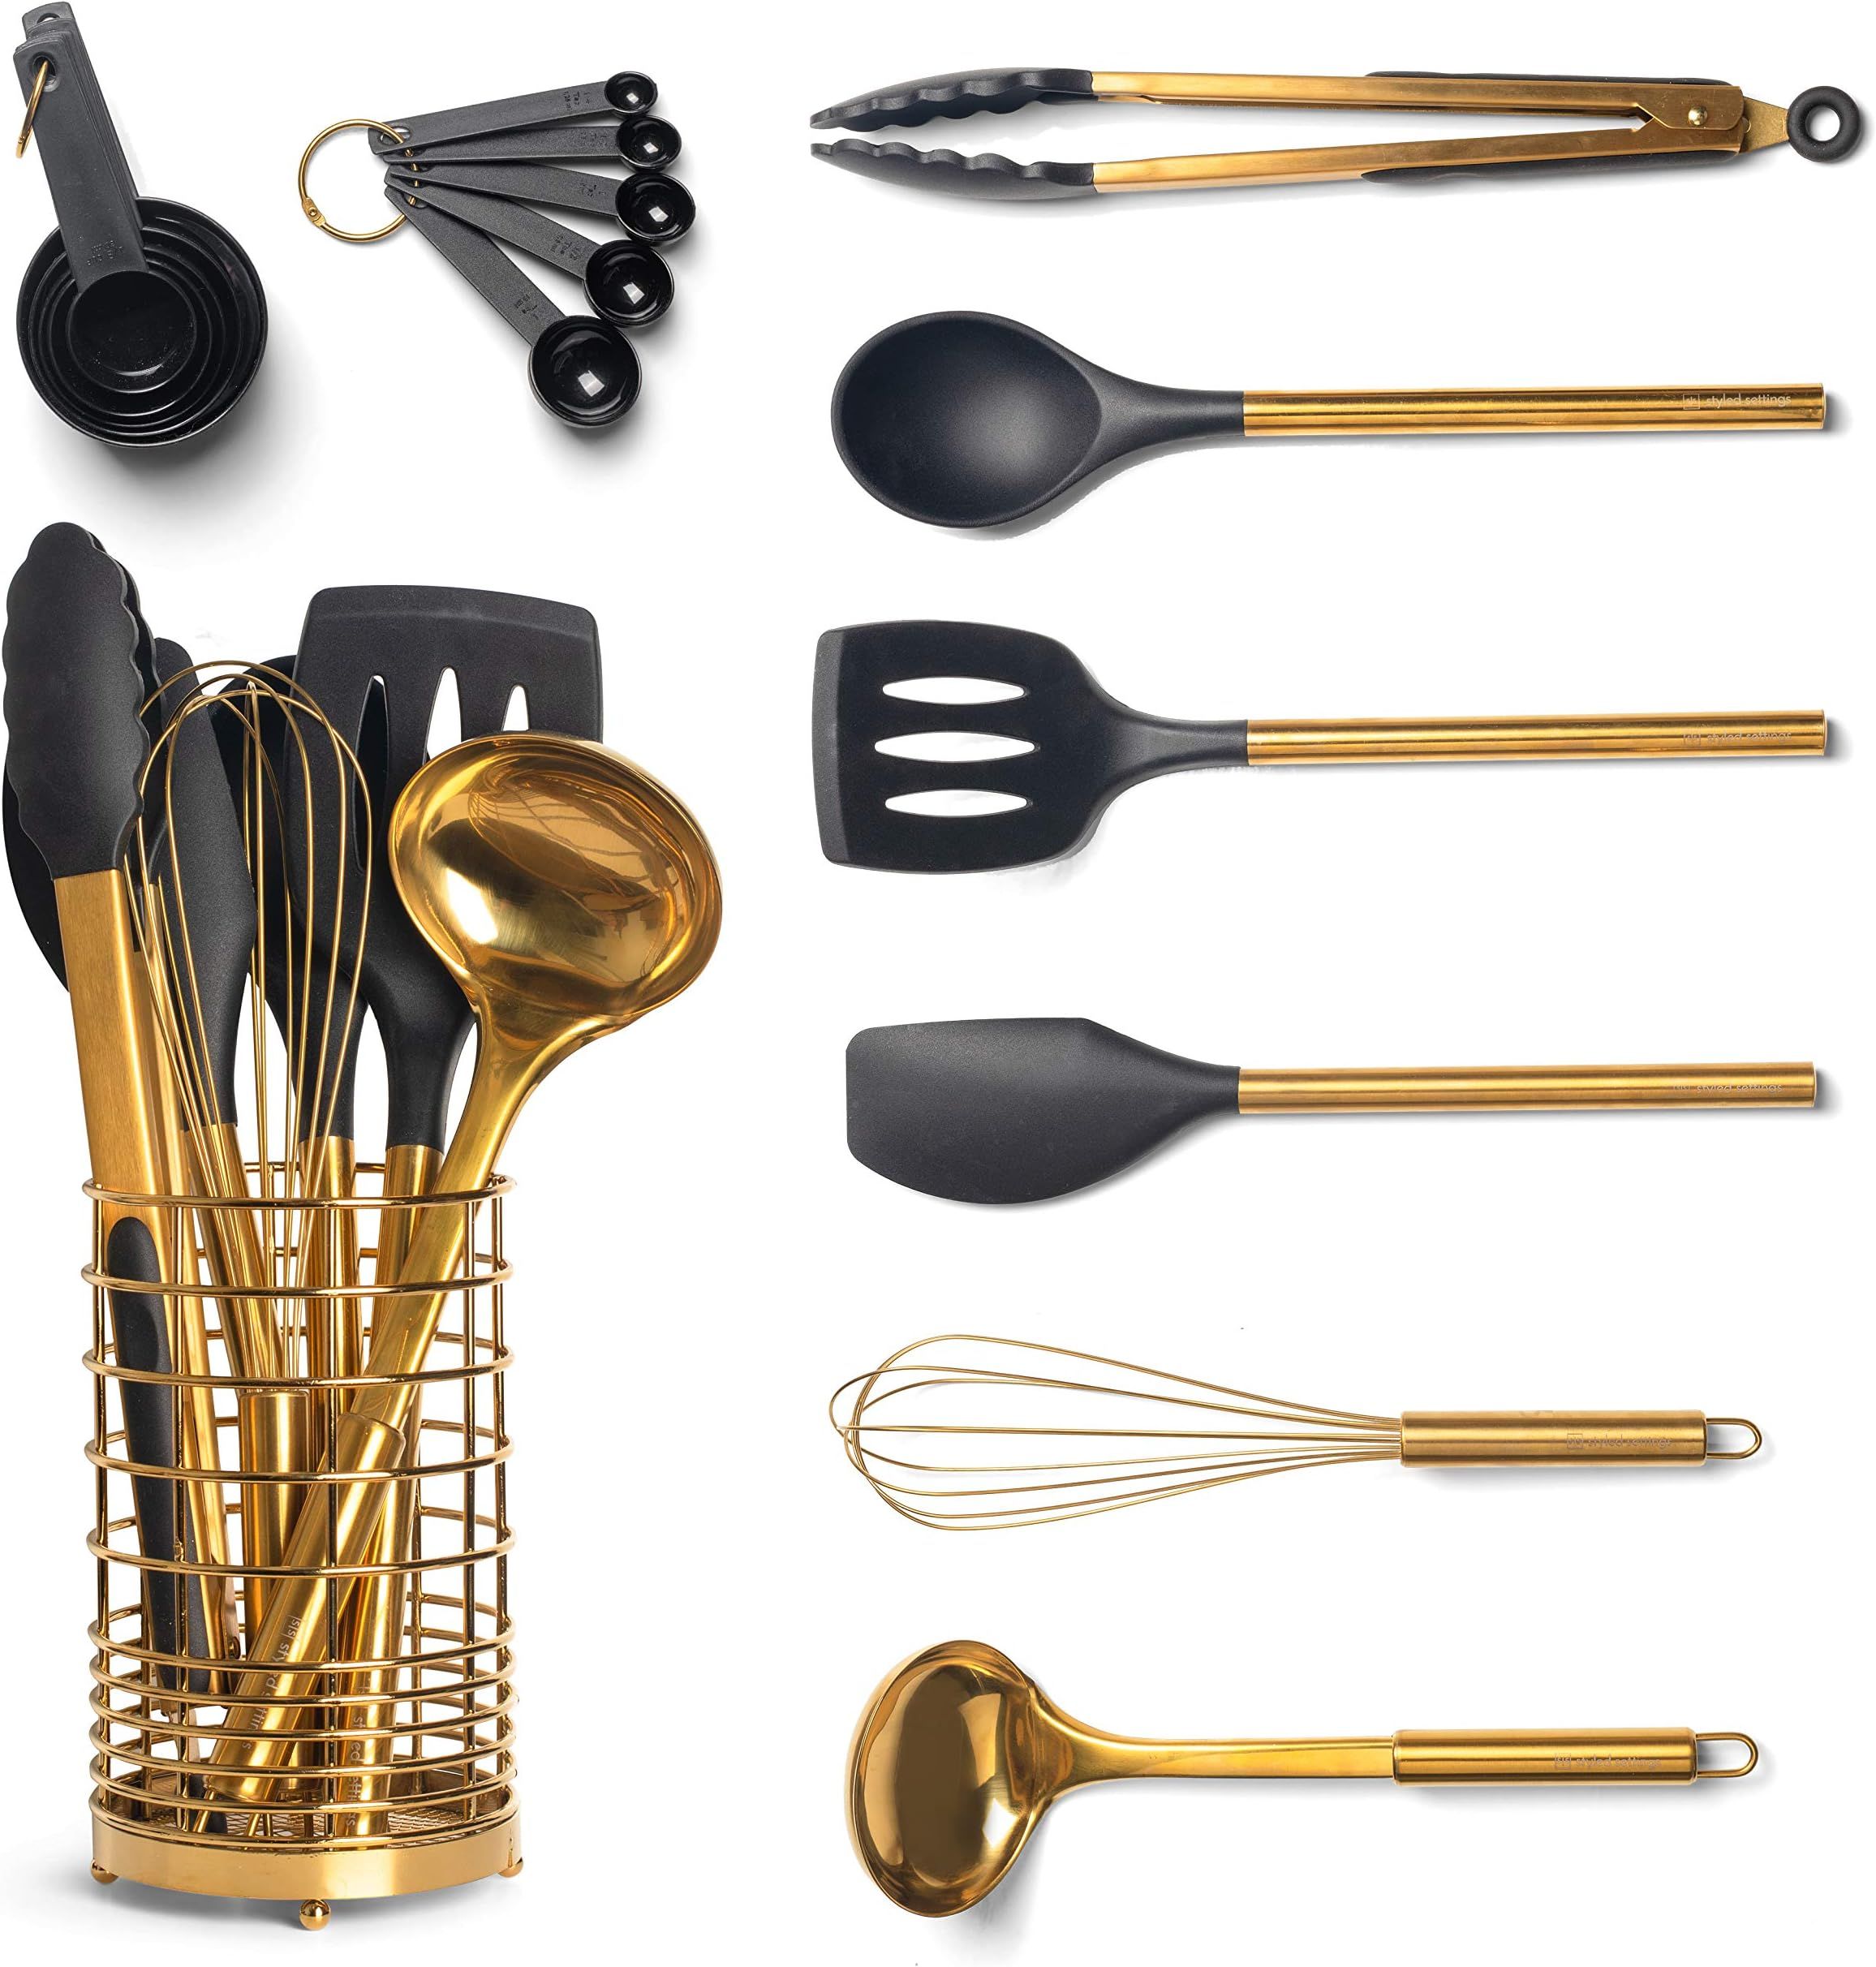 Black & Gold Kitchen Utensils with Metal Gold Utensil Holder -17PC Gold Cooking Utensils Set Include | Amazon (US)